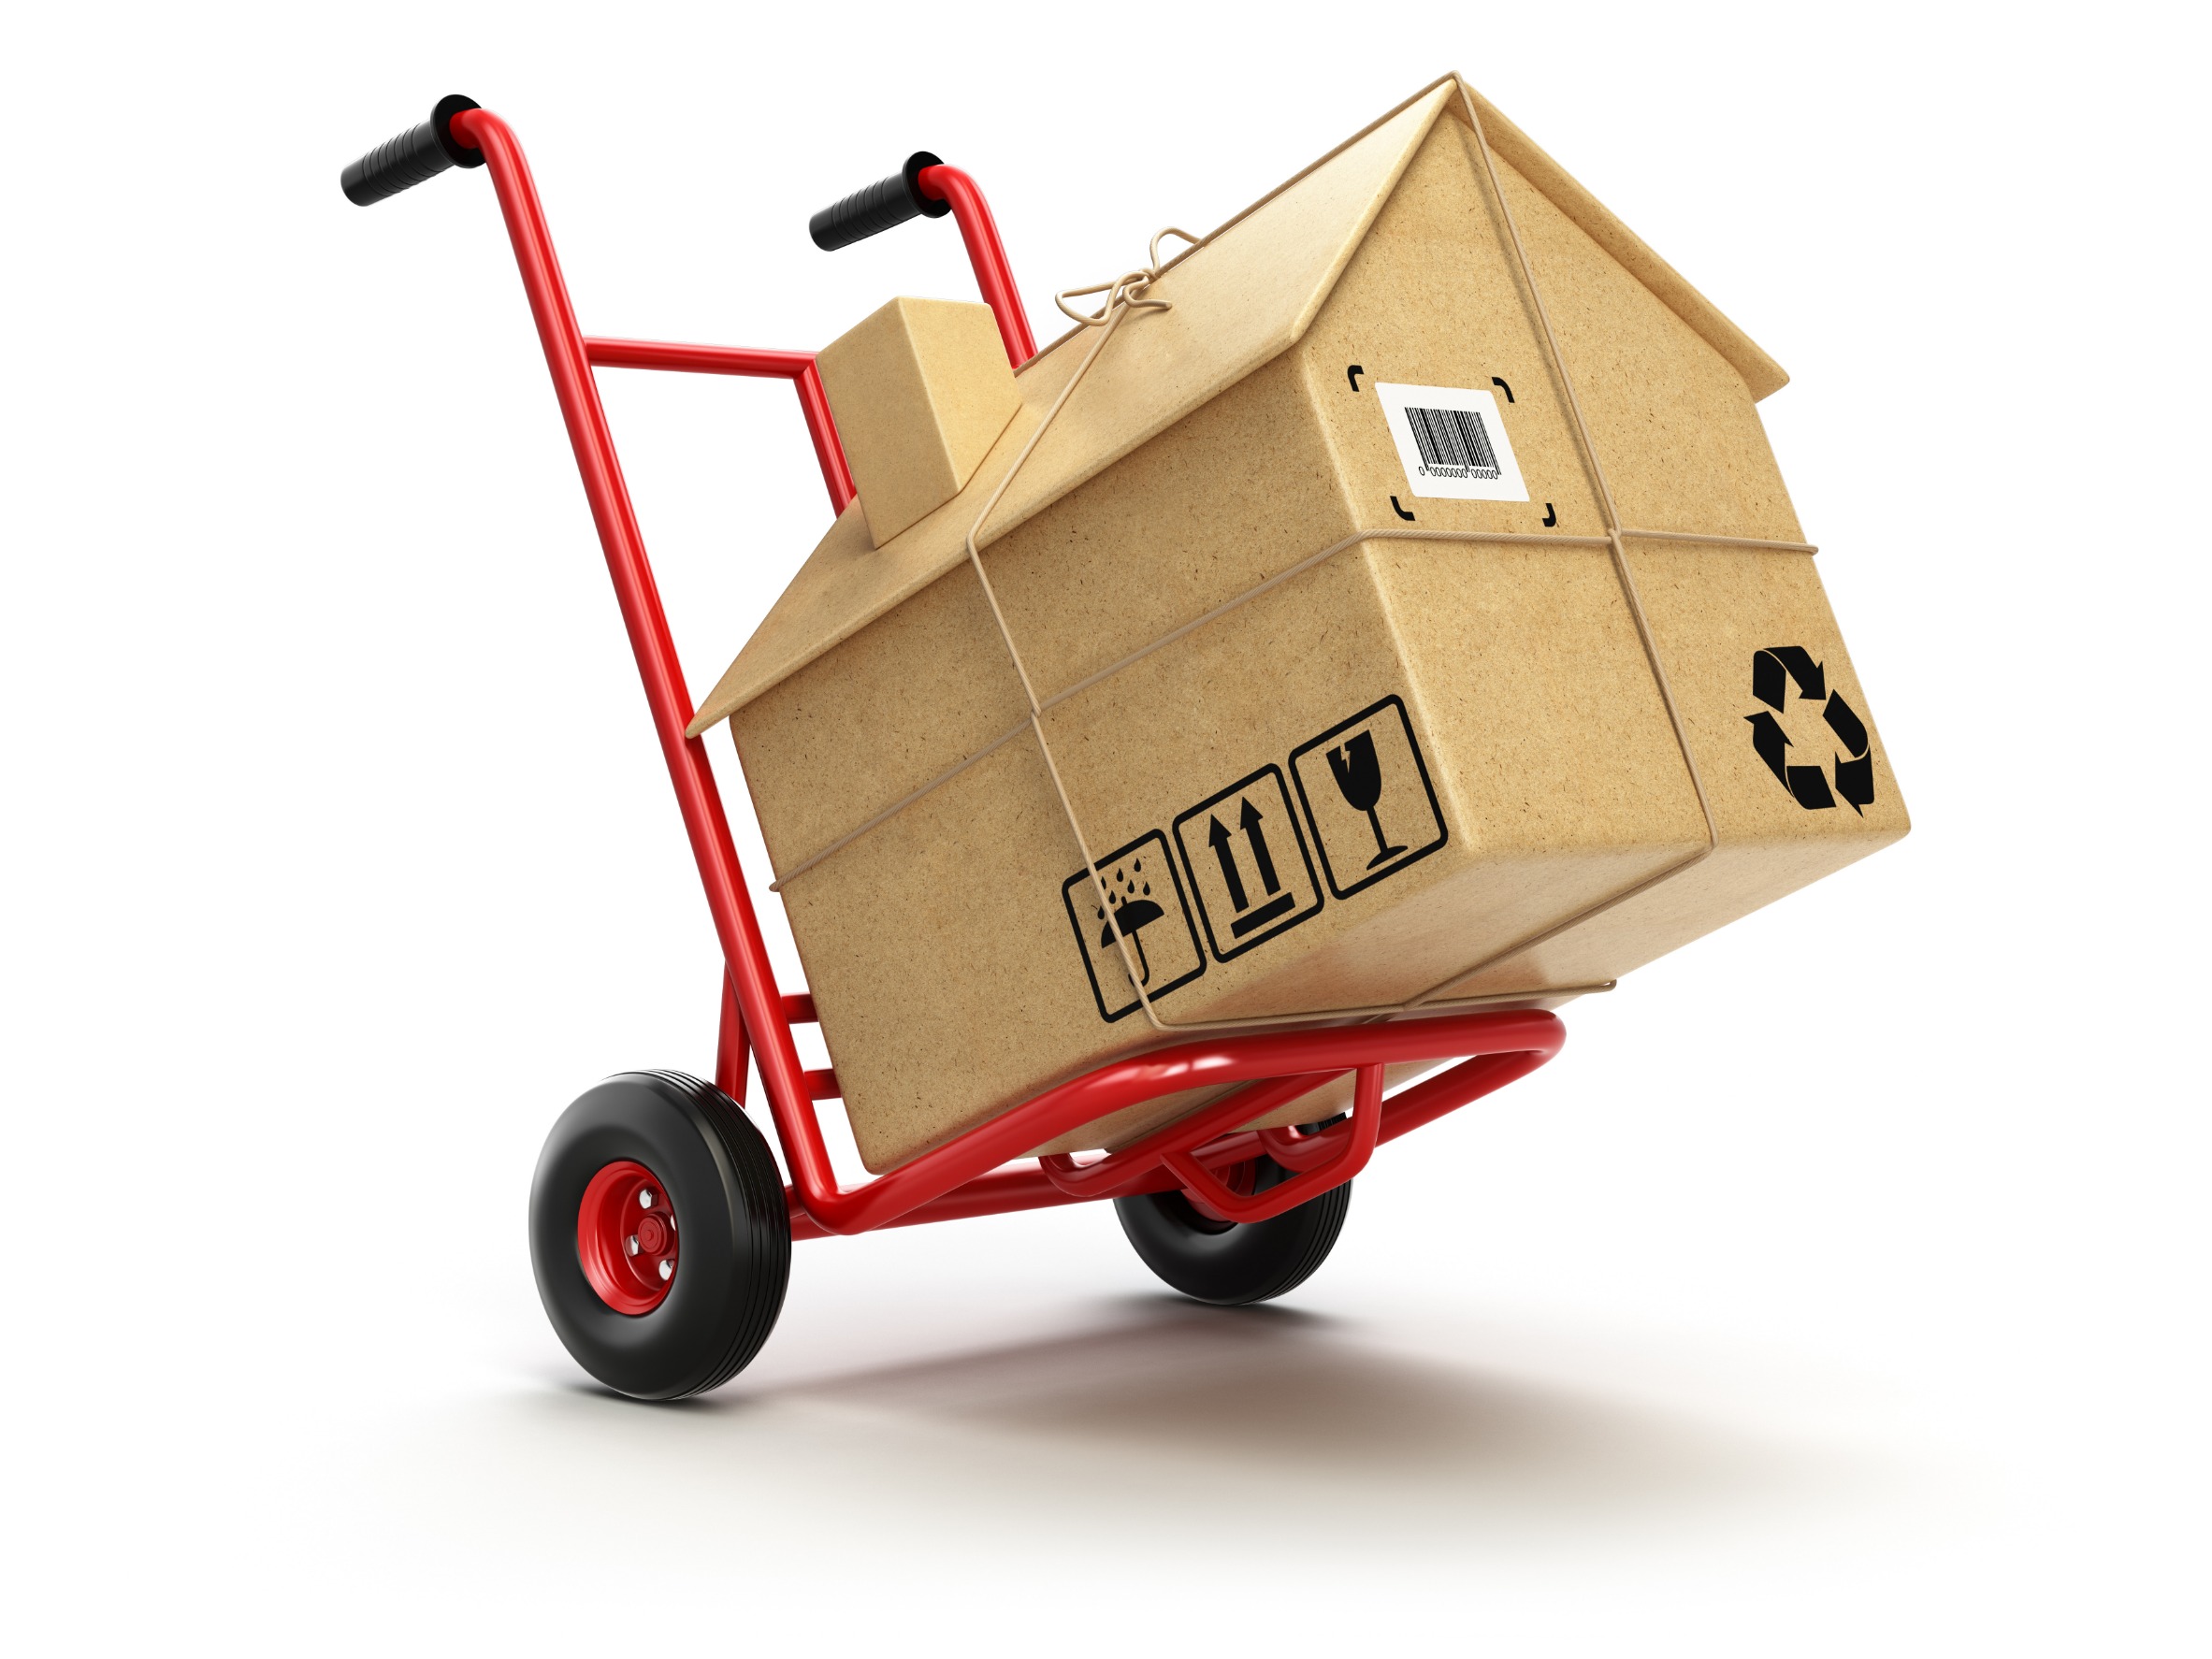 Town N Country FL Local Professional Movers Near Me